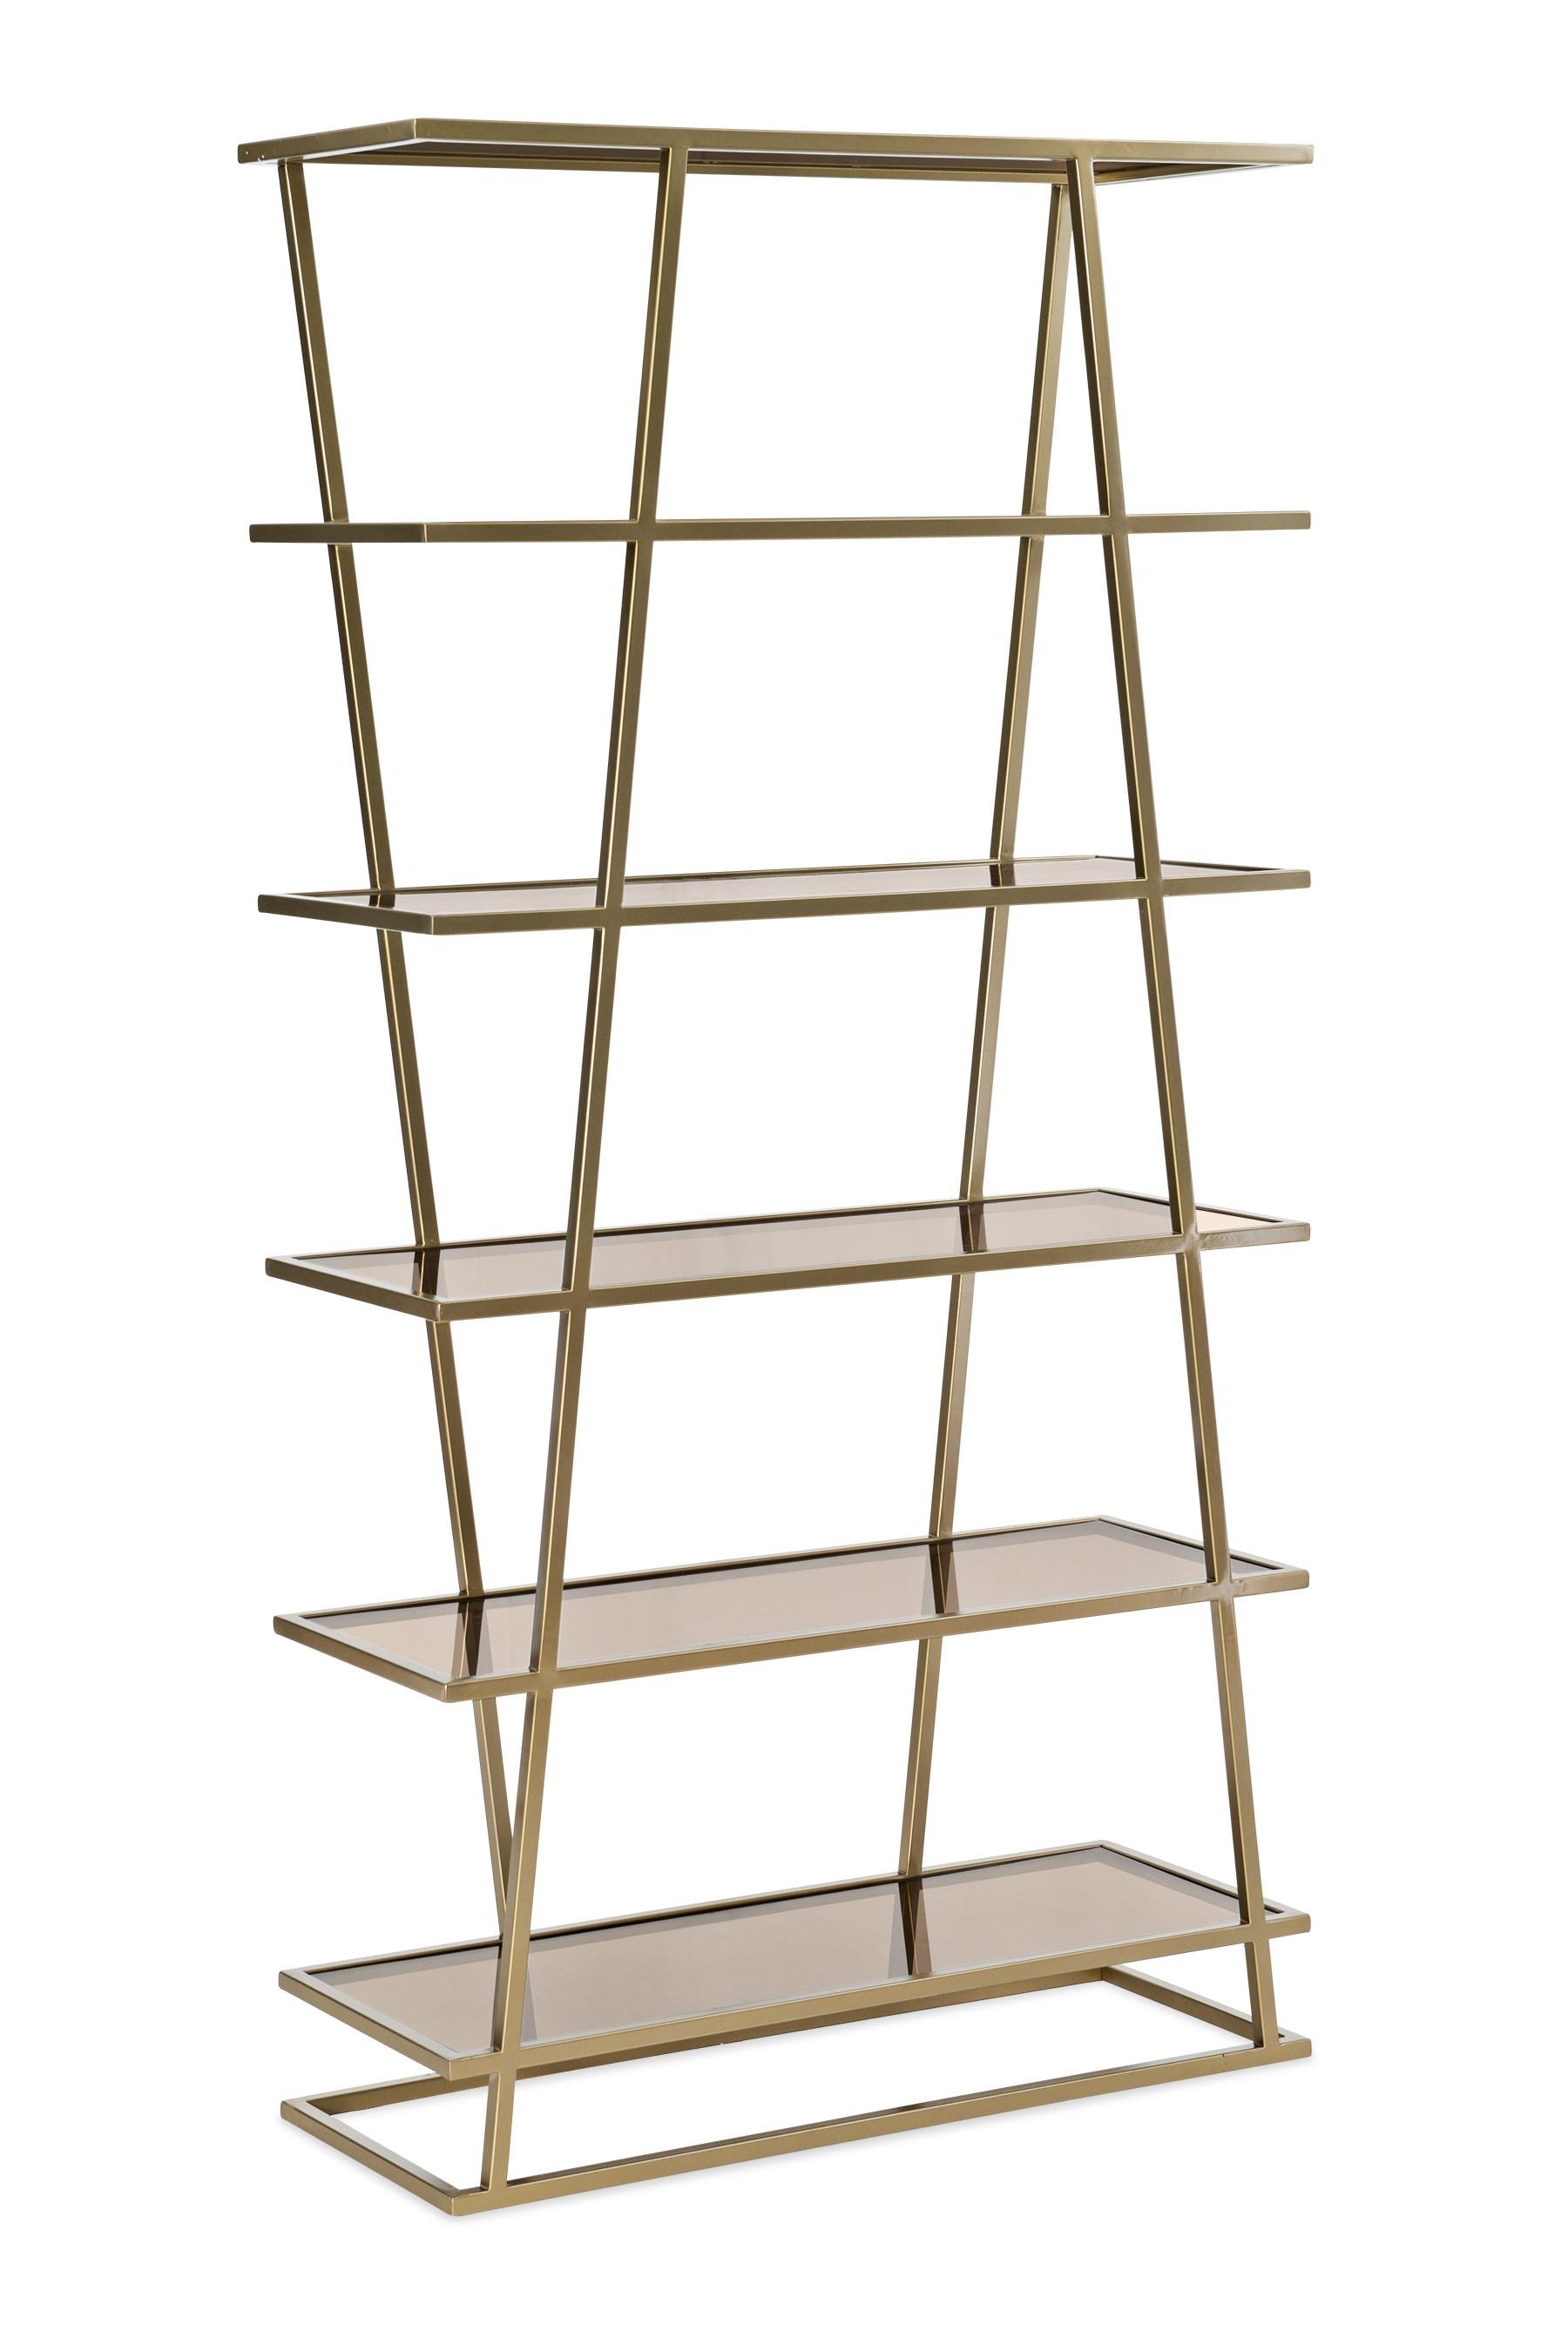 Contemporary Etagere VECTOR ETAGERE M101-419-811 in Gold 